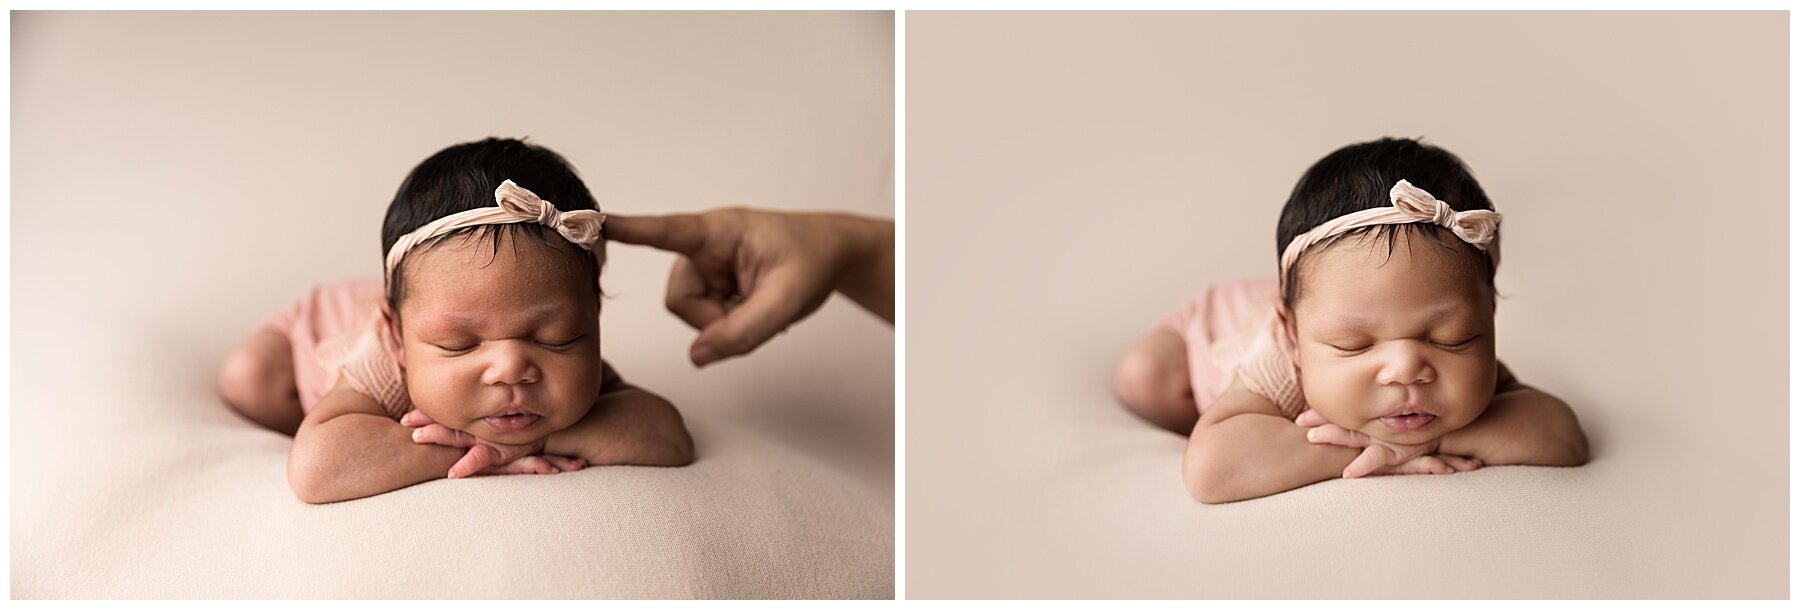 How to Pose a Baby From One of Dallas' Best Newborn Photographers